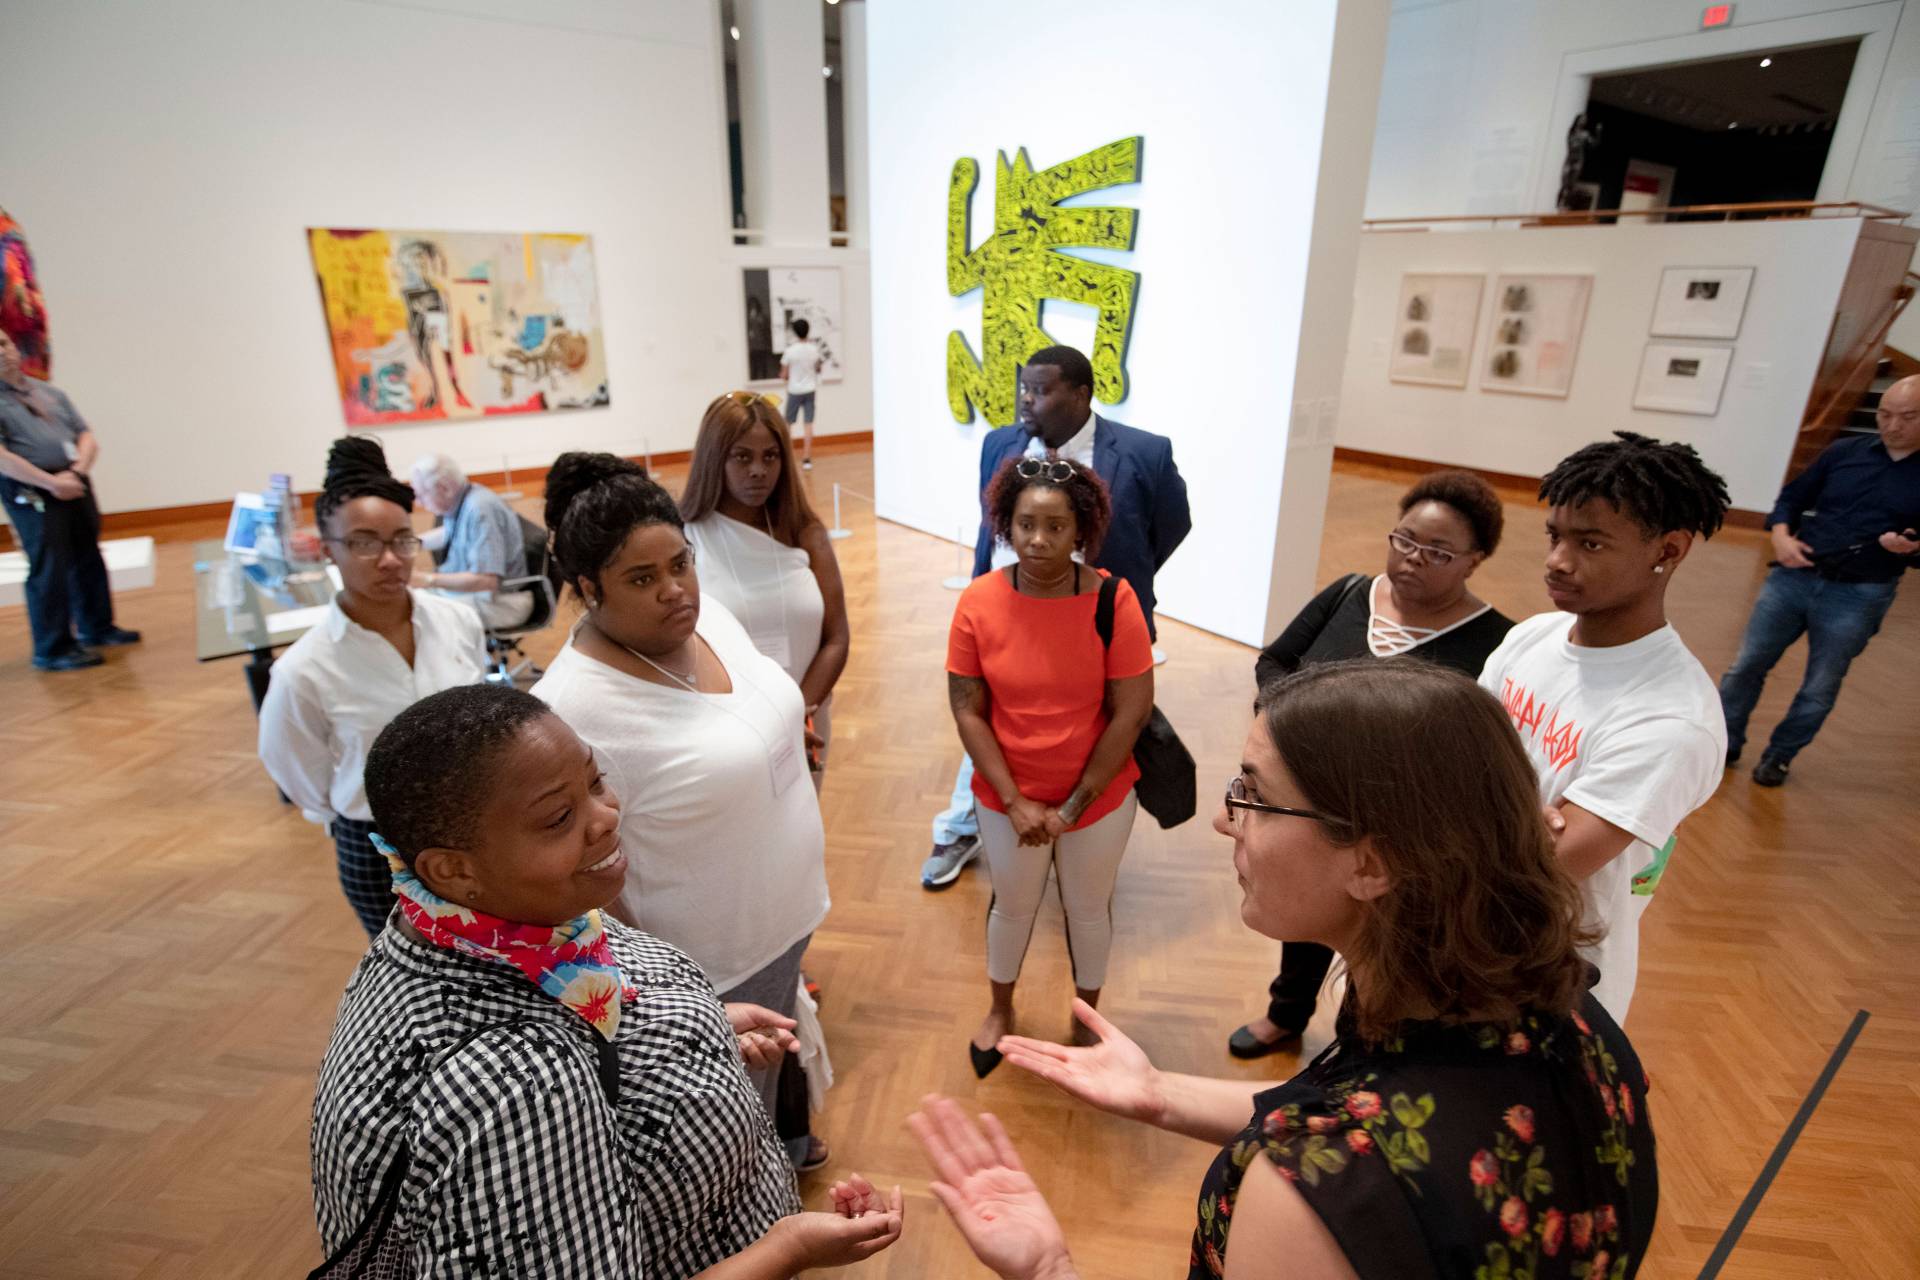 Mitra Abbaspour speaks to members of HBCUs on tour of the art museum